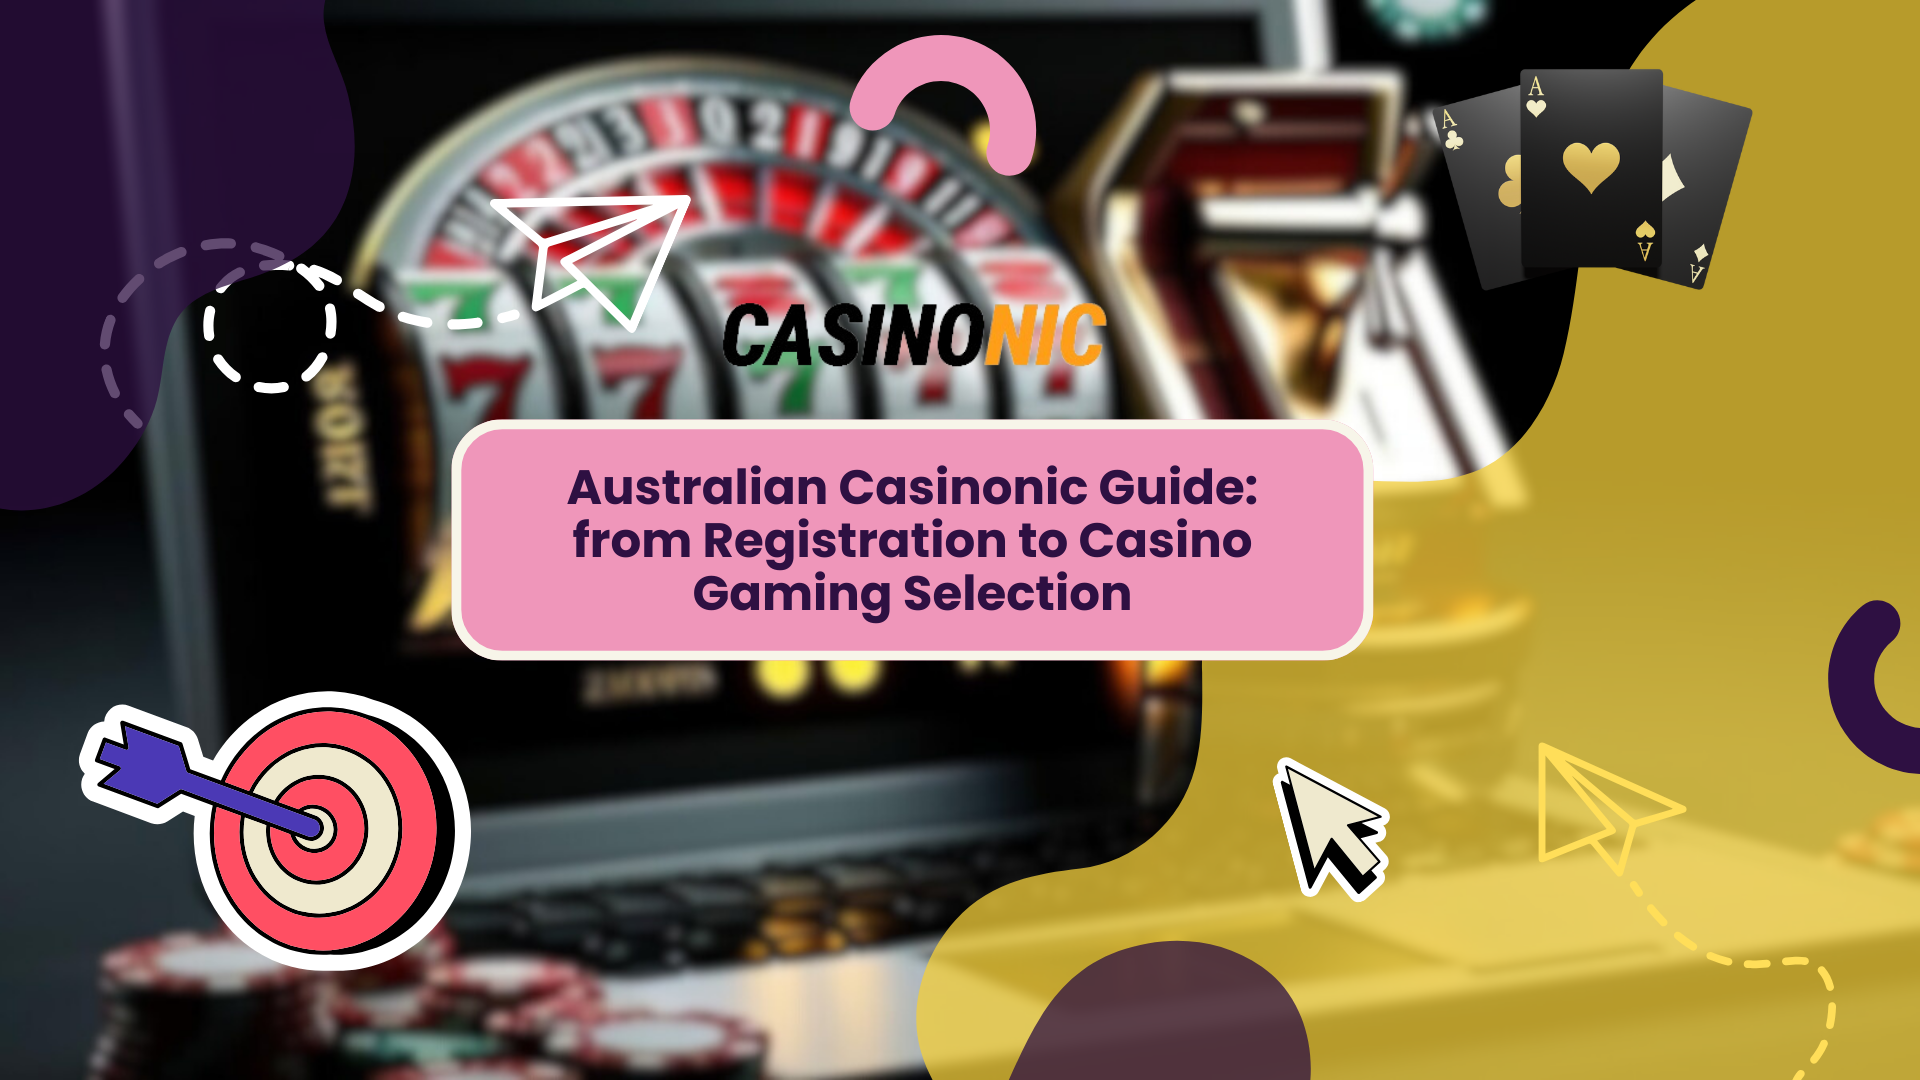 Australian Casinonic Guide: from Registration to Casino Gaming Selection